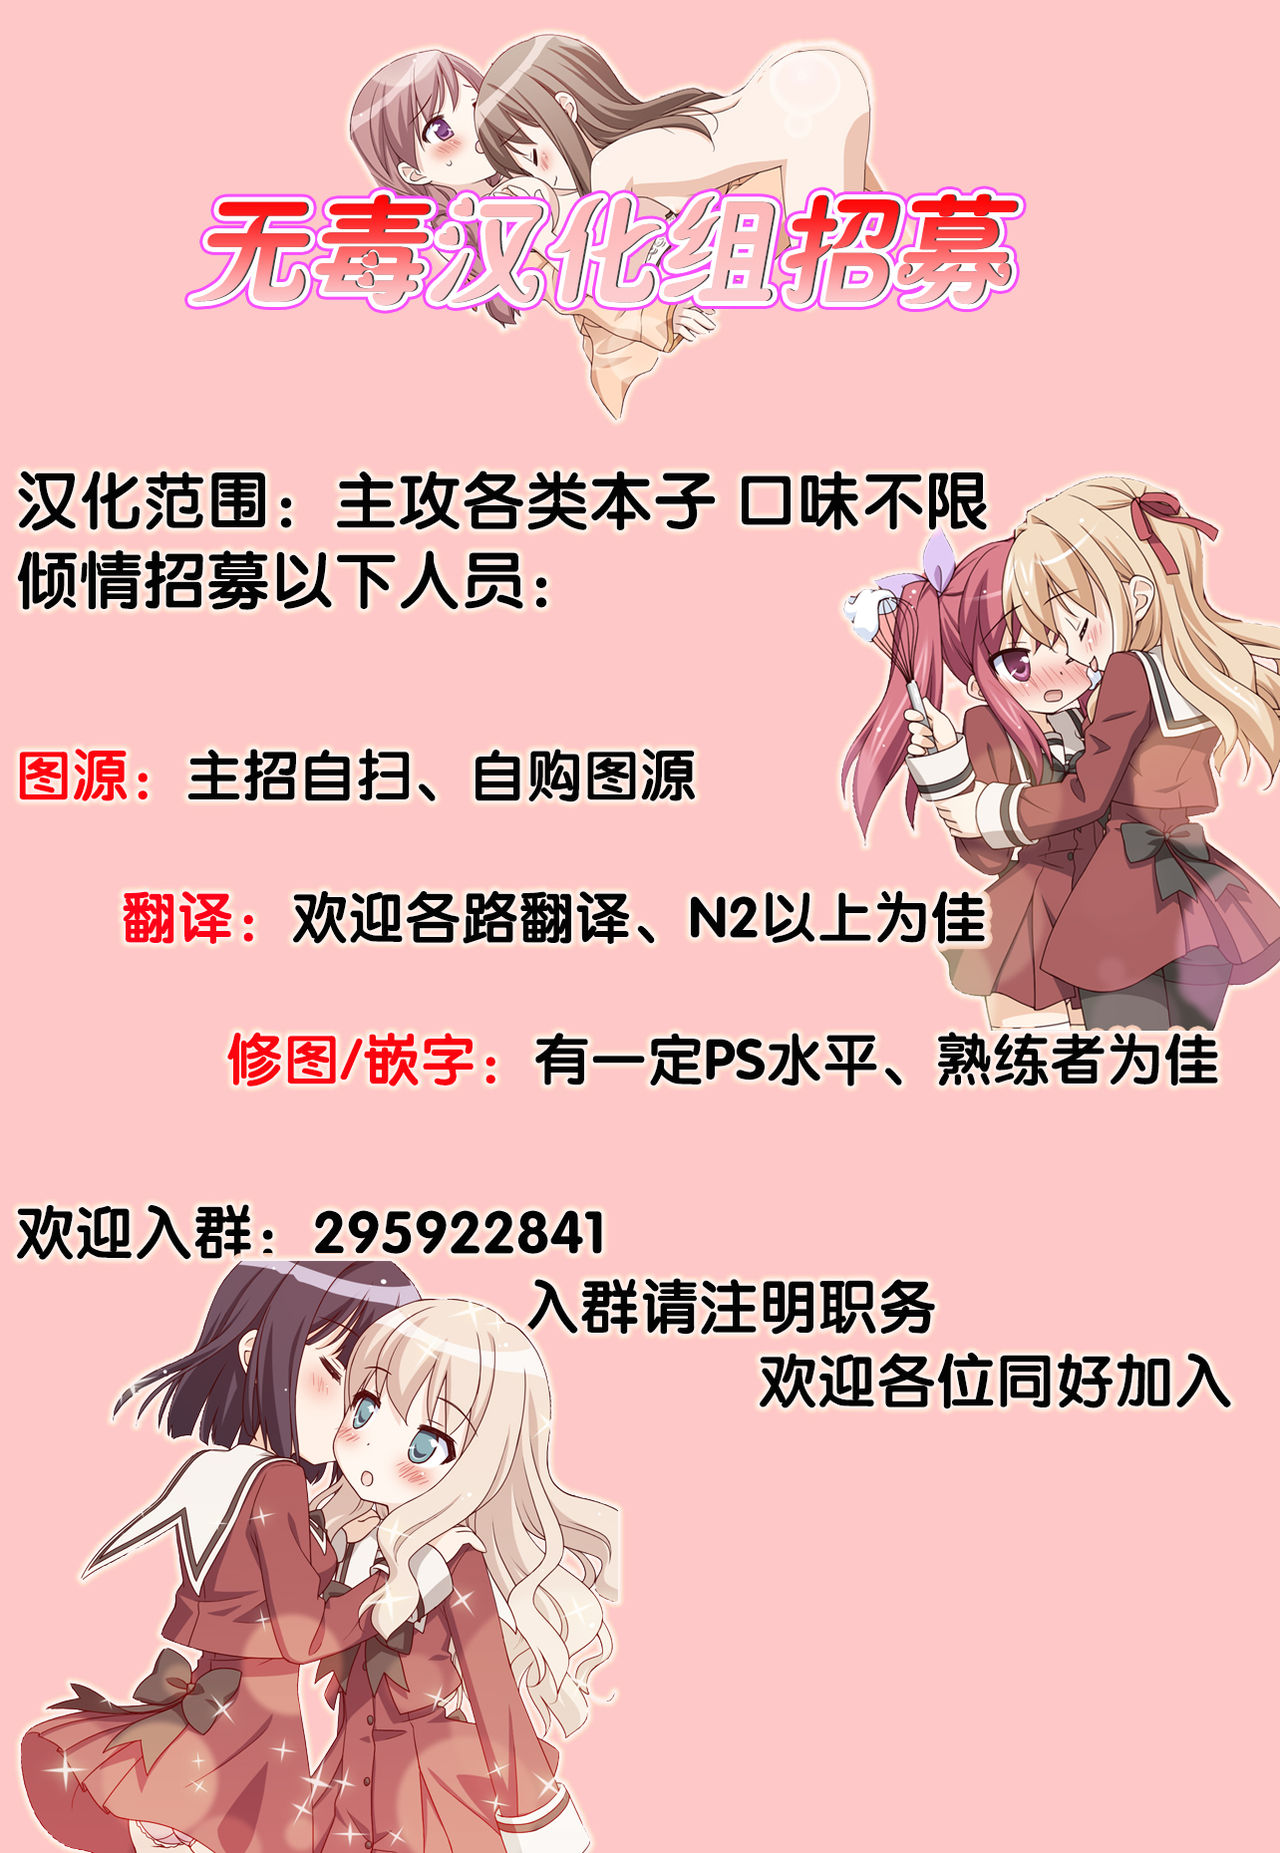 [Anthology] Ao Yuri -Story Of Club Activities- [Chinese] [无毒汉化组] [Incomplete] [アンソロジー] 青百合 -Story Of Club Activities- [中国翻訳] [ページ欠落]